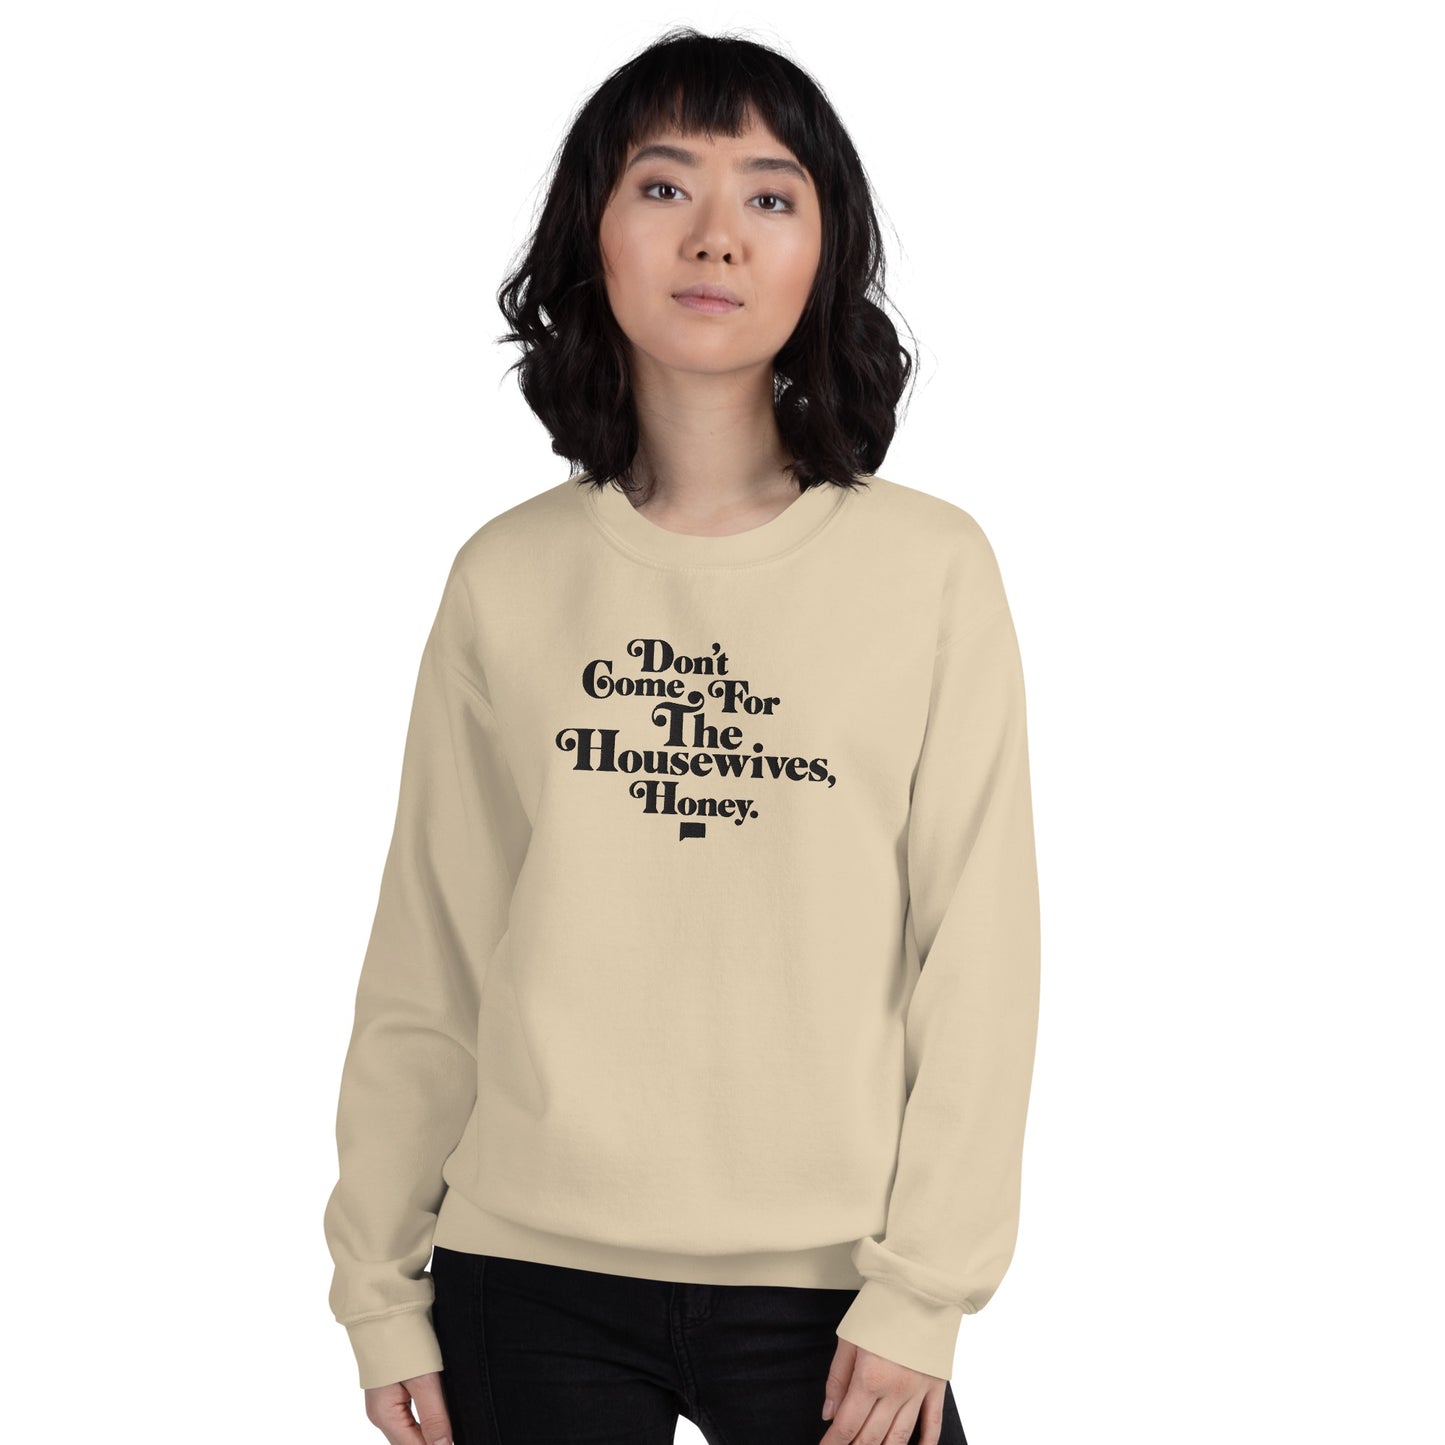 Don't Come for the Housewives, Honey! Embroidered Crewneck